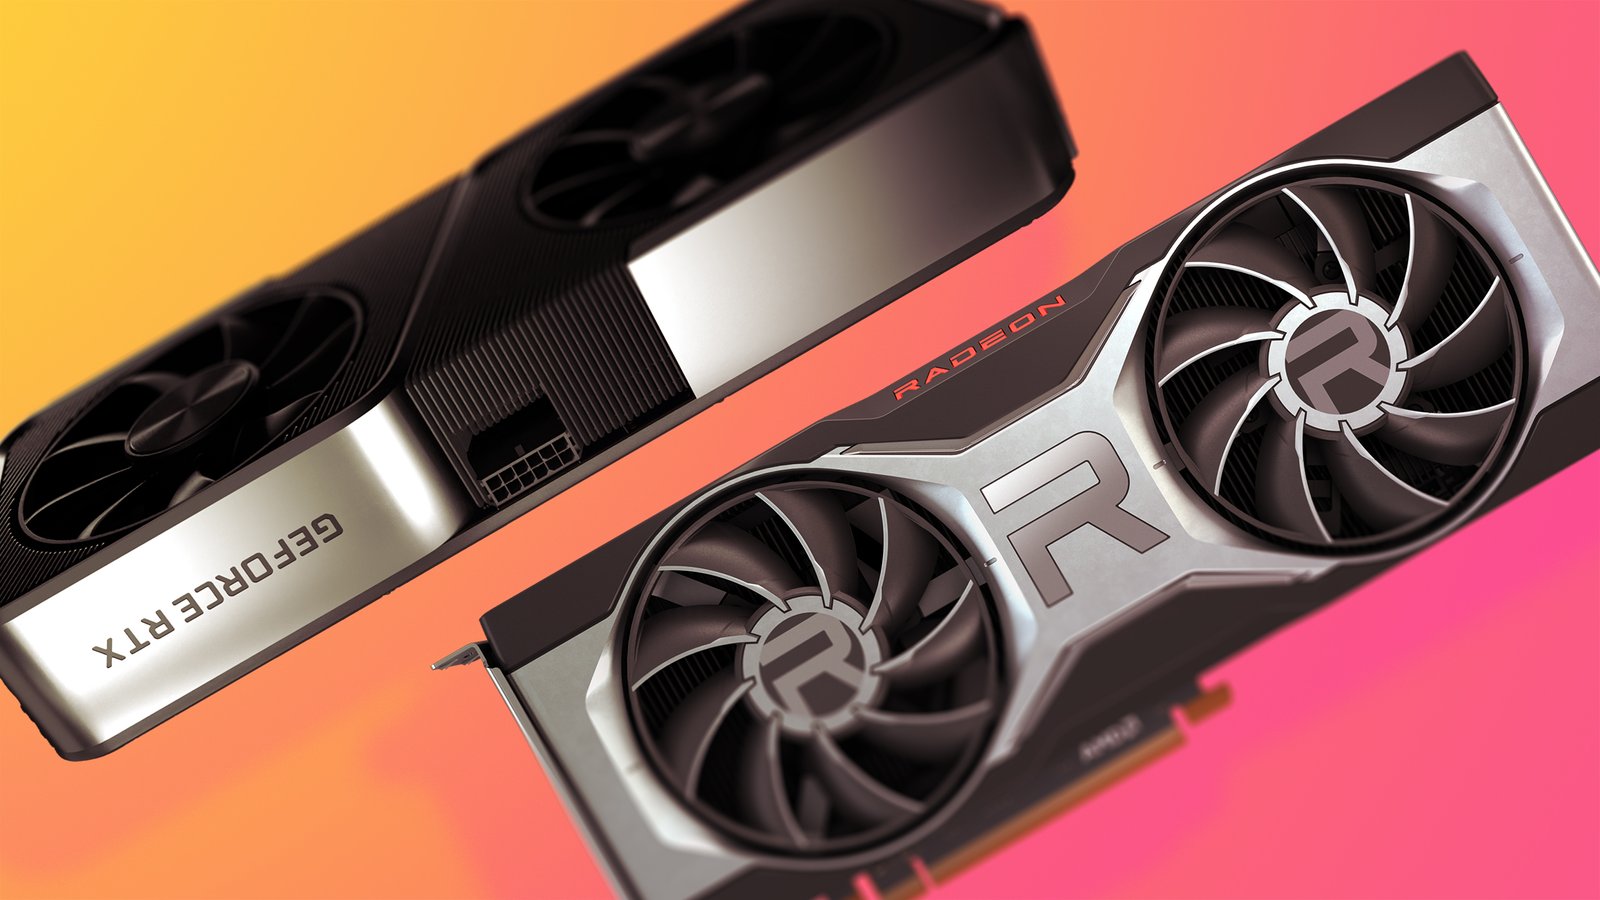 The Nvidia RTX 3070 and AMD RX 6700 XT side by side on a colourful background